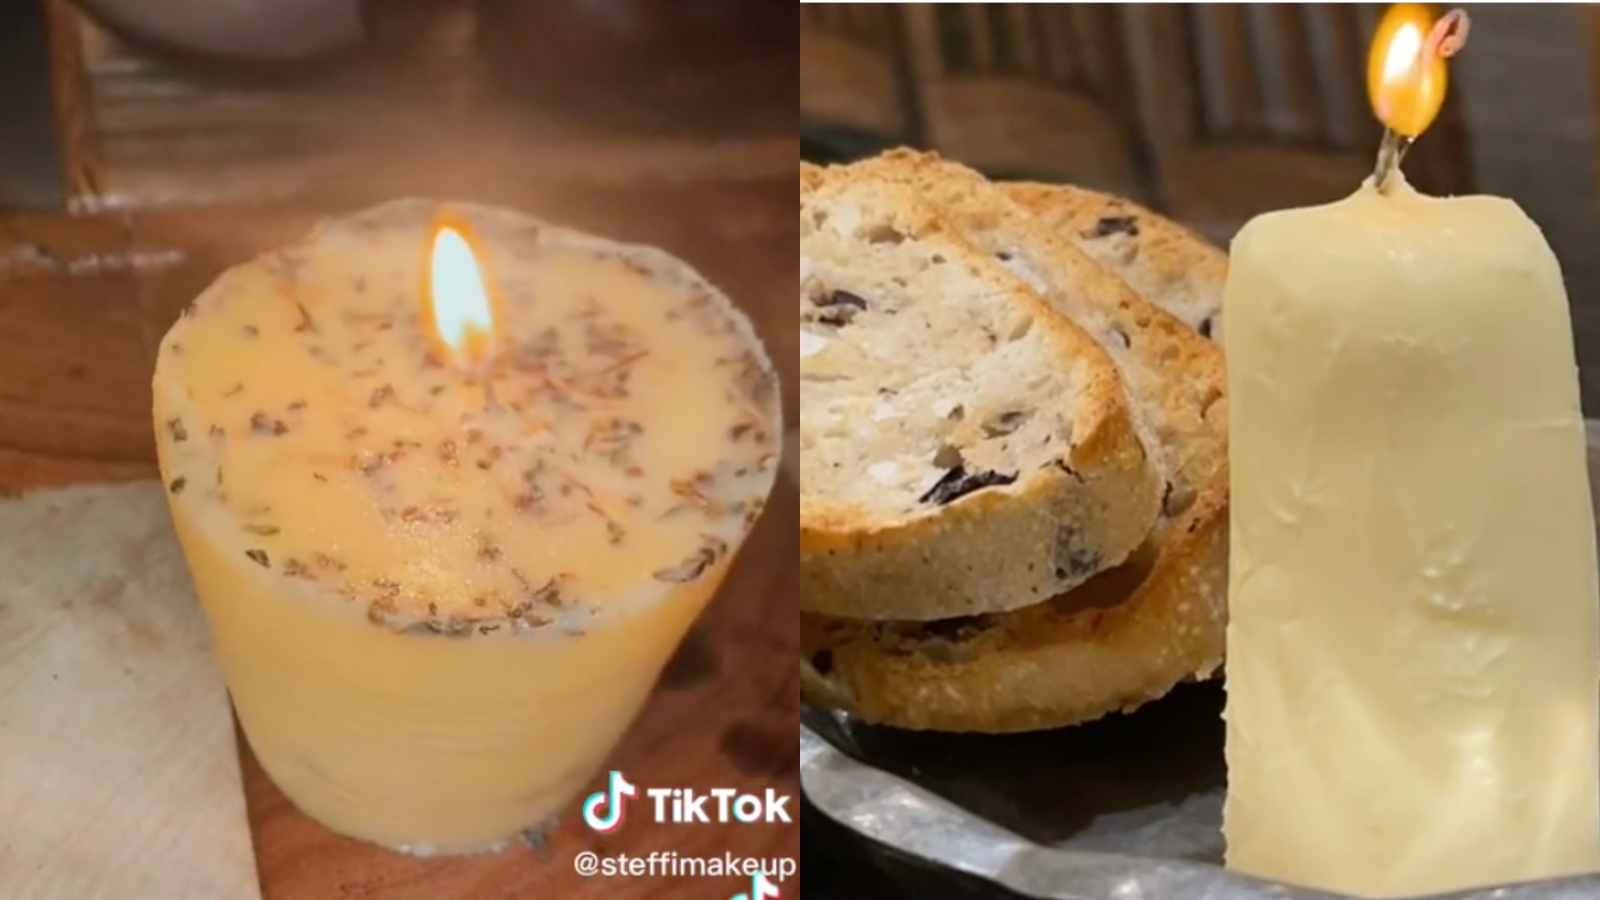 What's up with the butter candle TikTok trend? - Deseret News